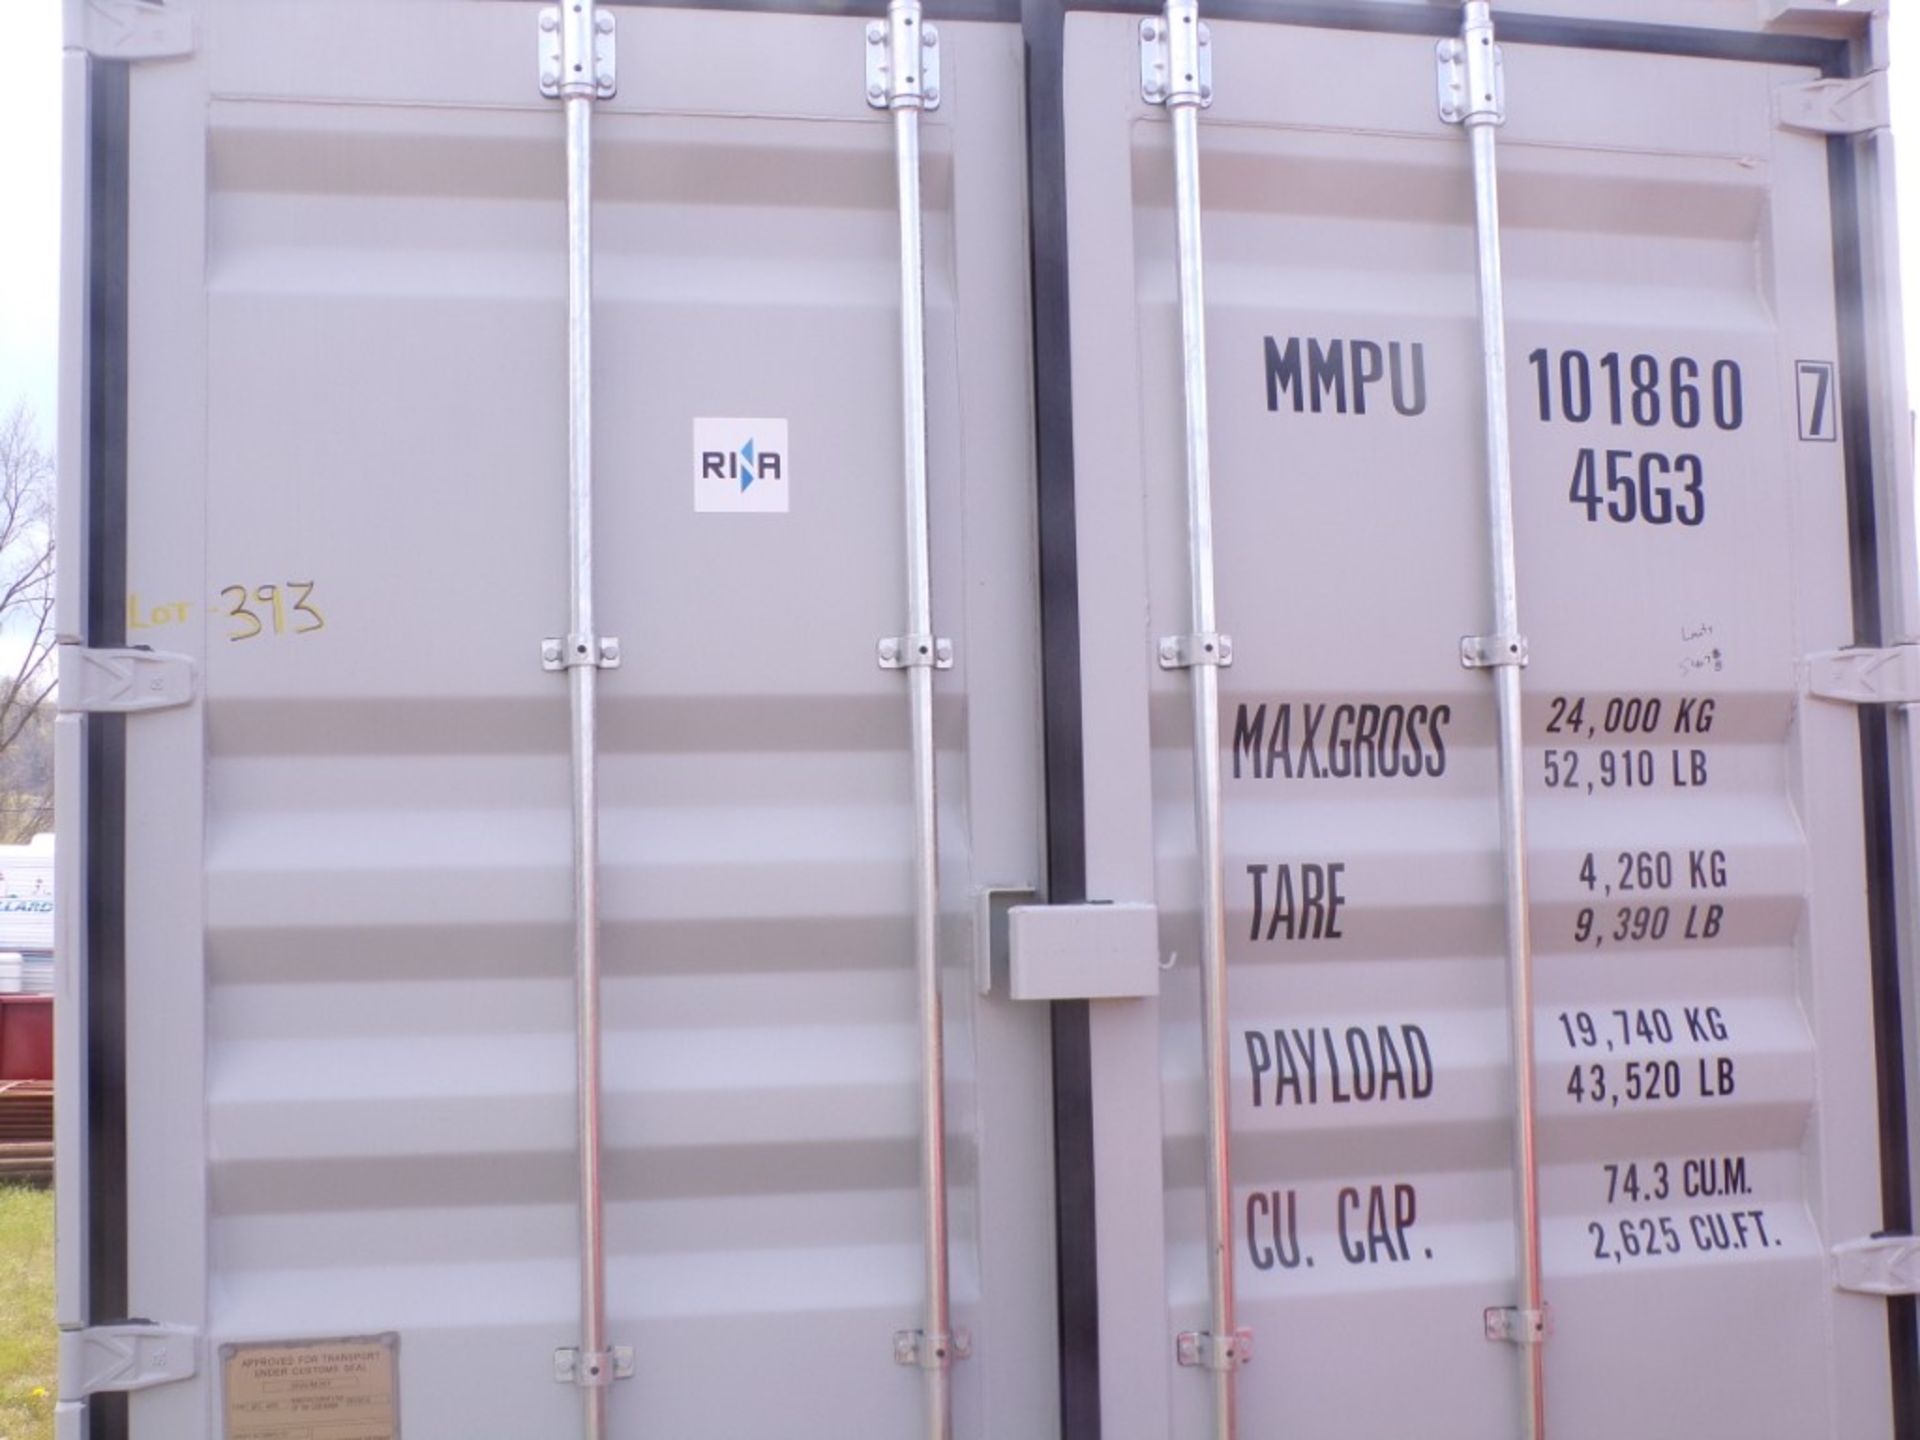 New 40' Shipping Container 5-Door, MPU 101860 7 (4678) - Image 2 of 2